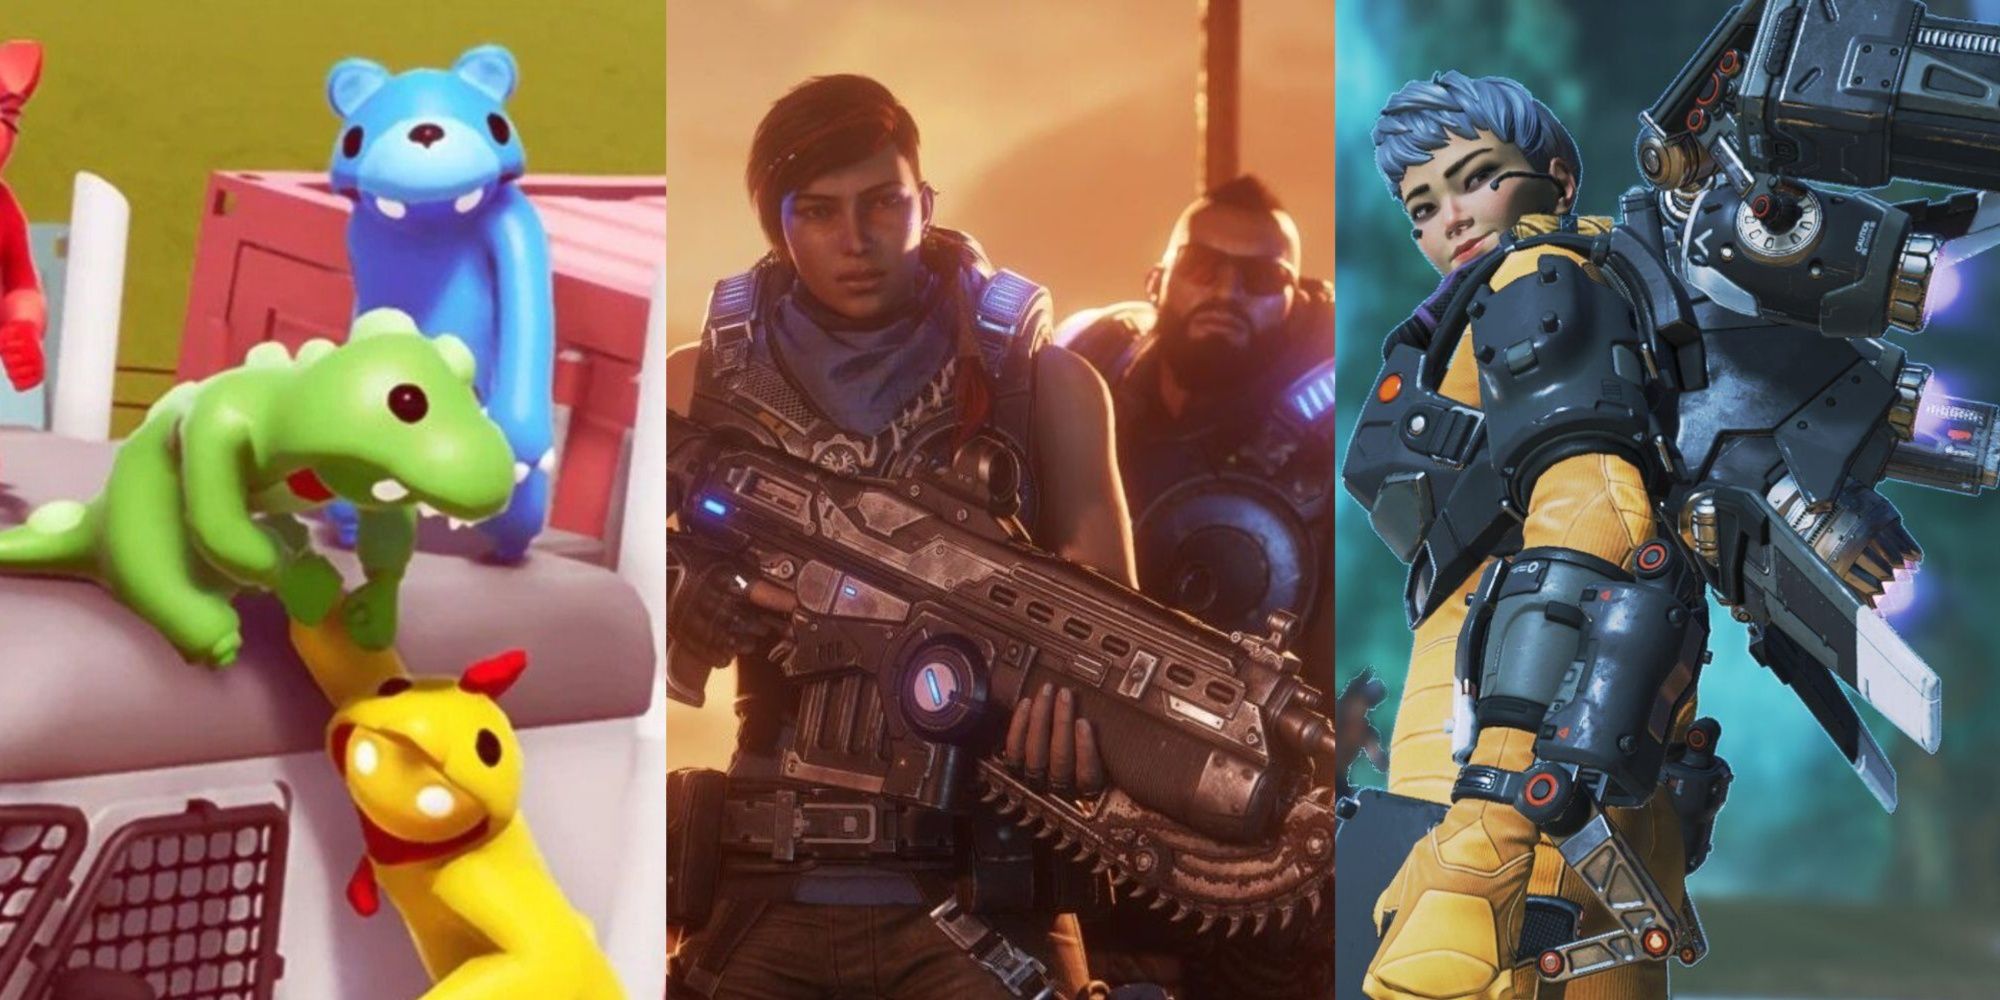 Best Action Games To Play With Friends Featured Split Image Gang Beasts, Gears 5, and Apex Legends